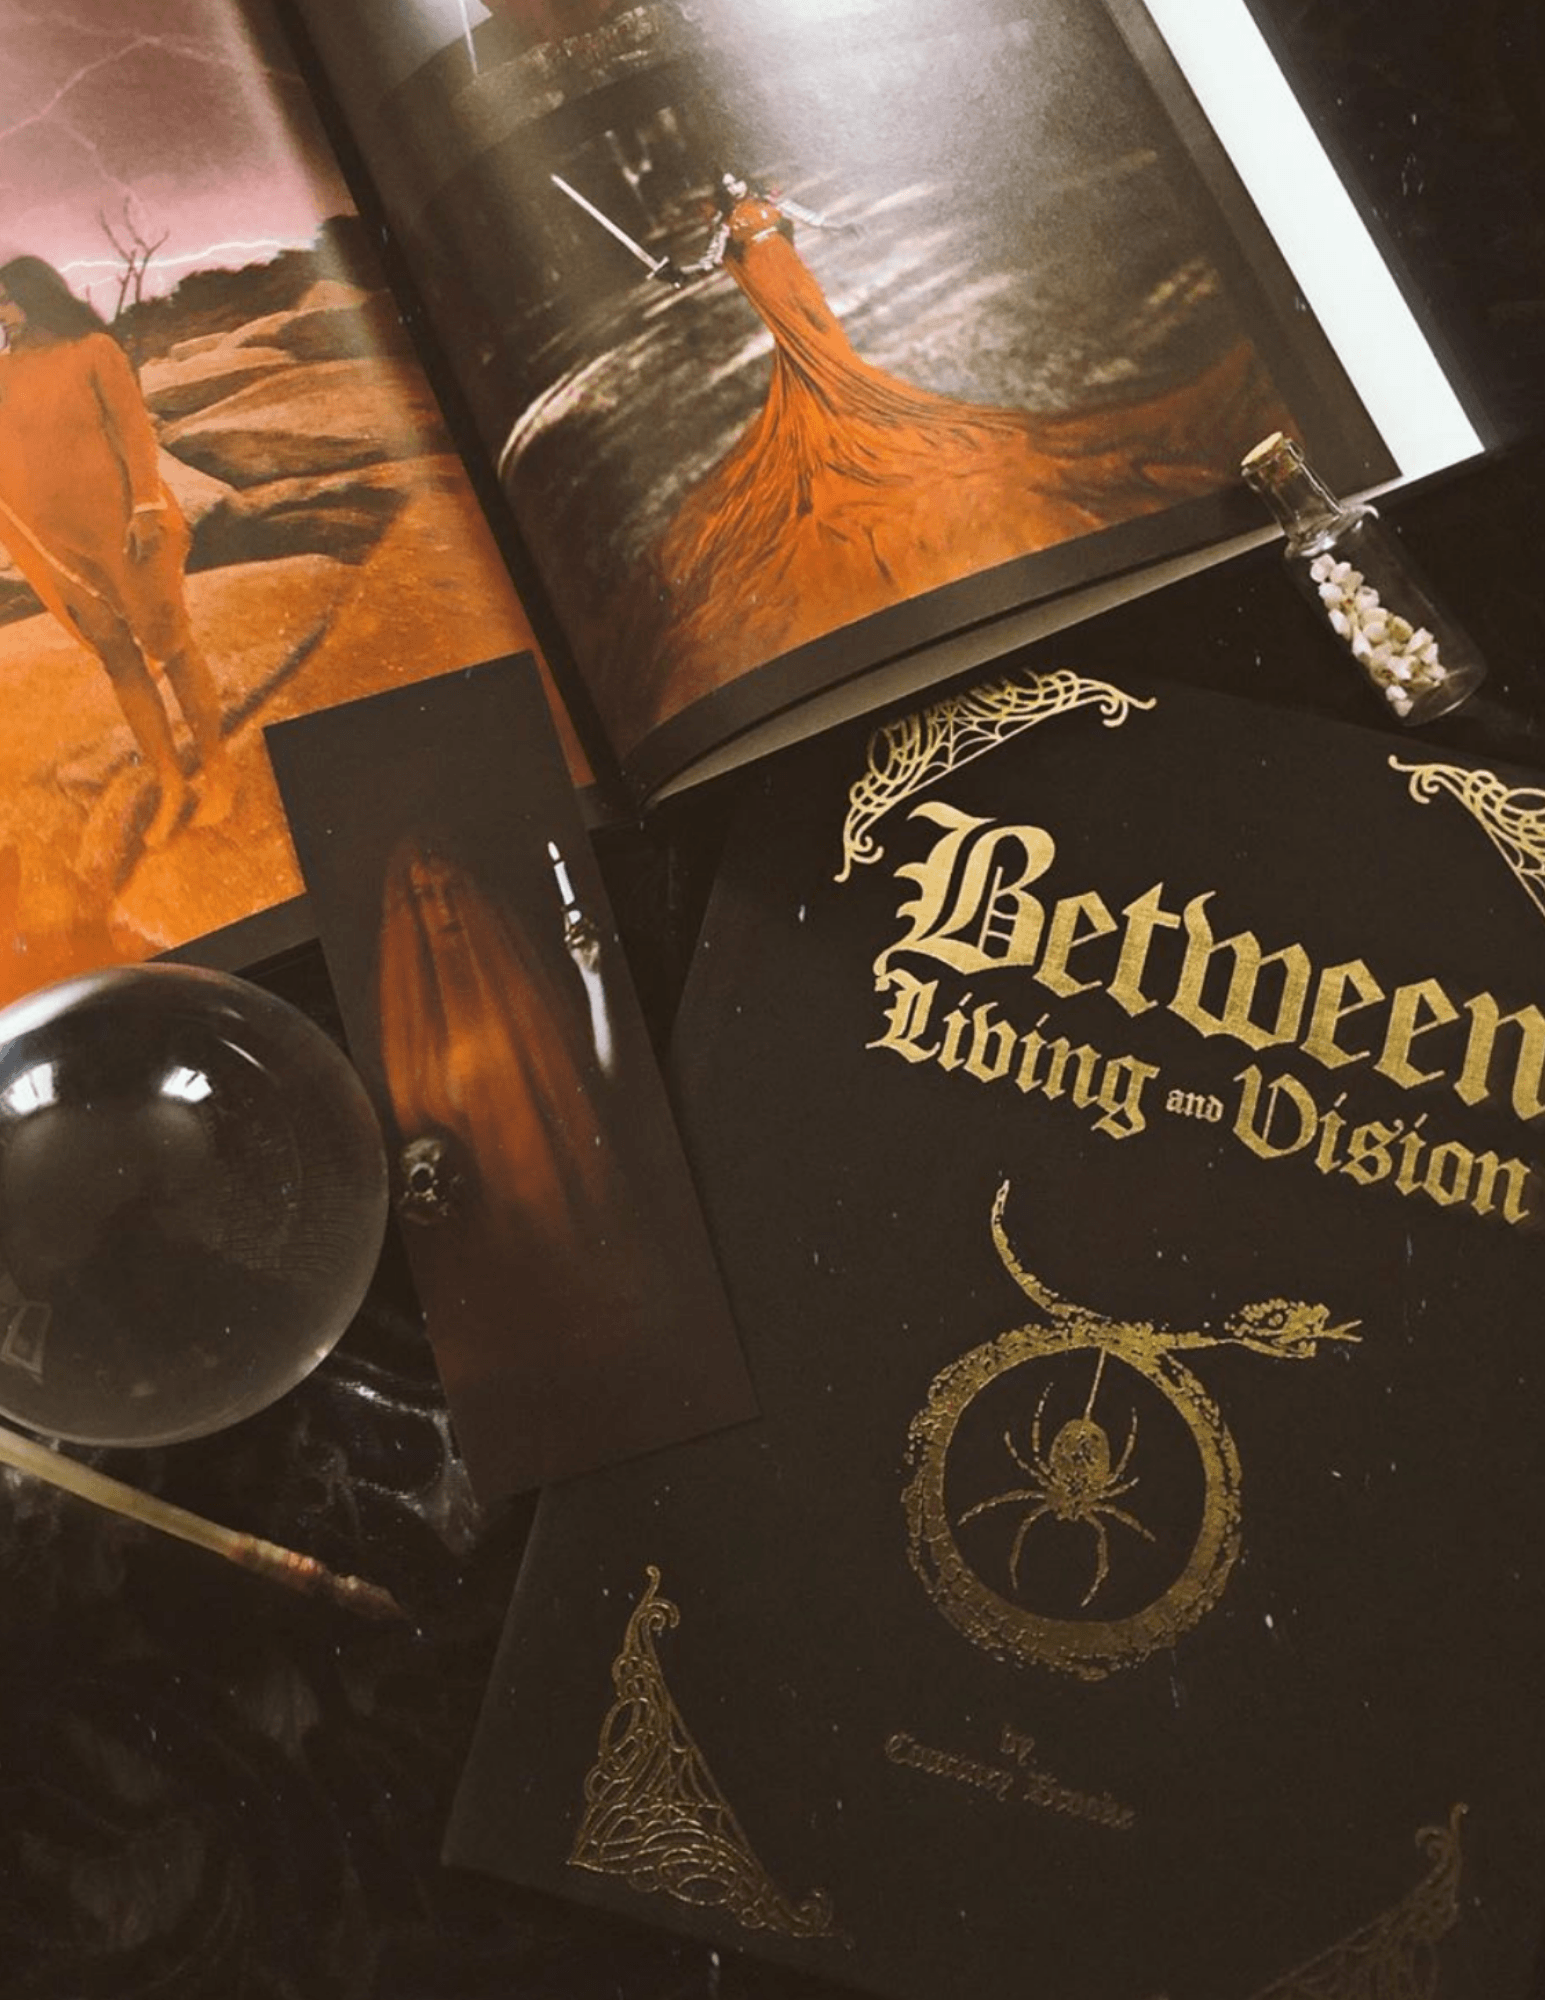 Between Living & Vision, Light Witch Volume 1 - Exalted Funeral